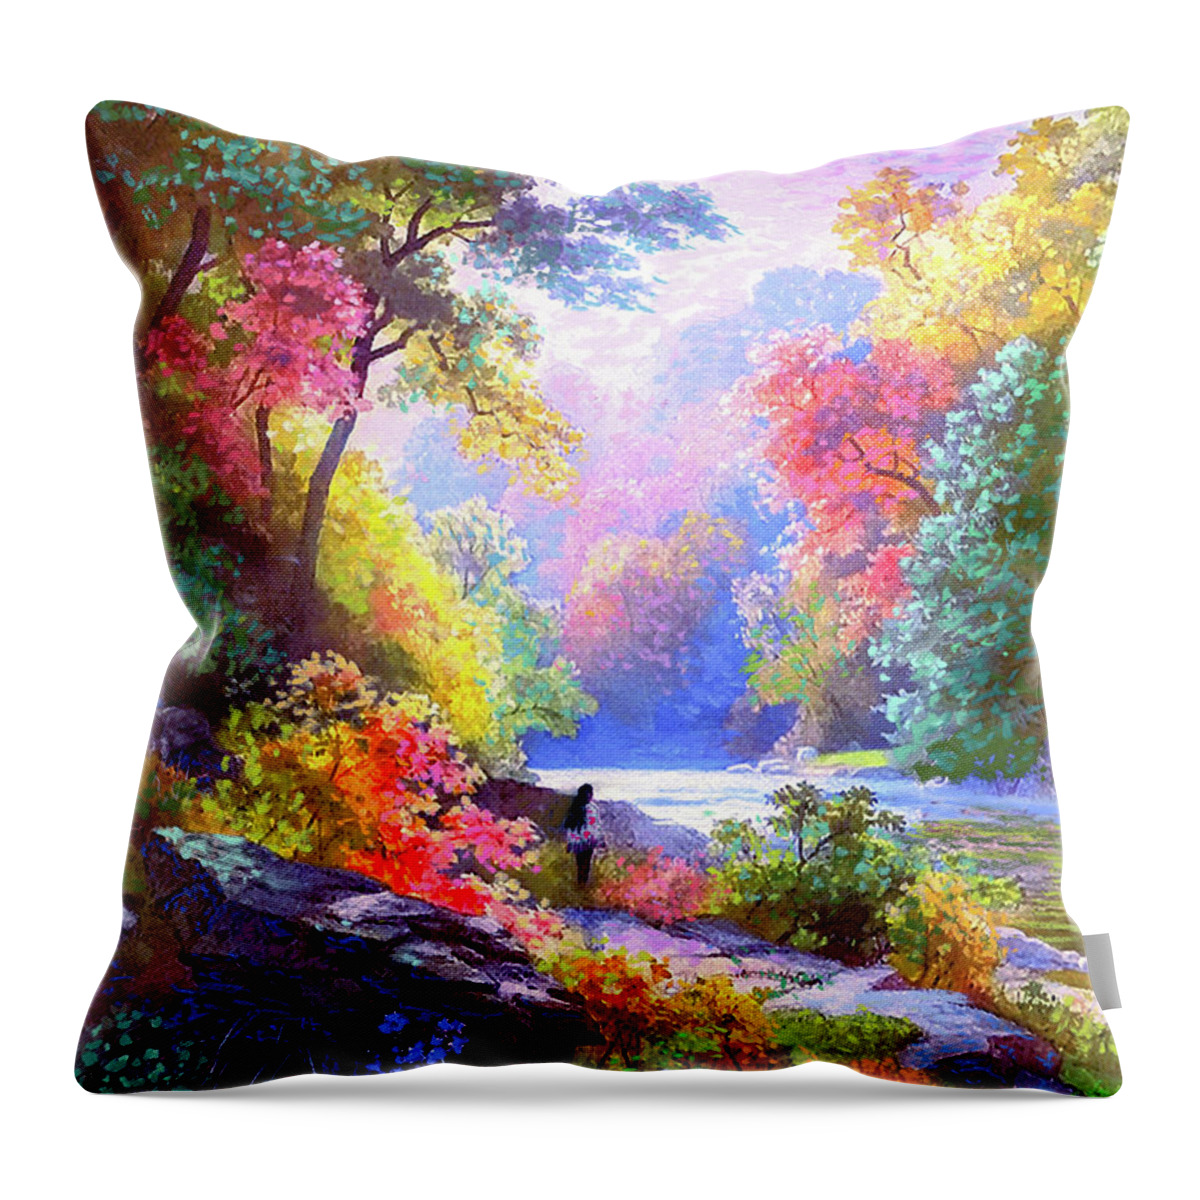 Meditation Throw Pillow featuring the painting Sacred Landscape Meditation by Jane Small